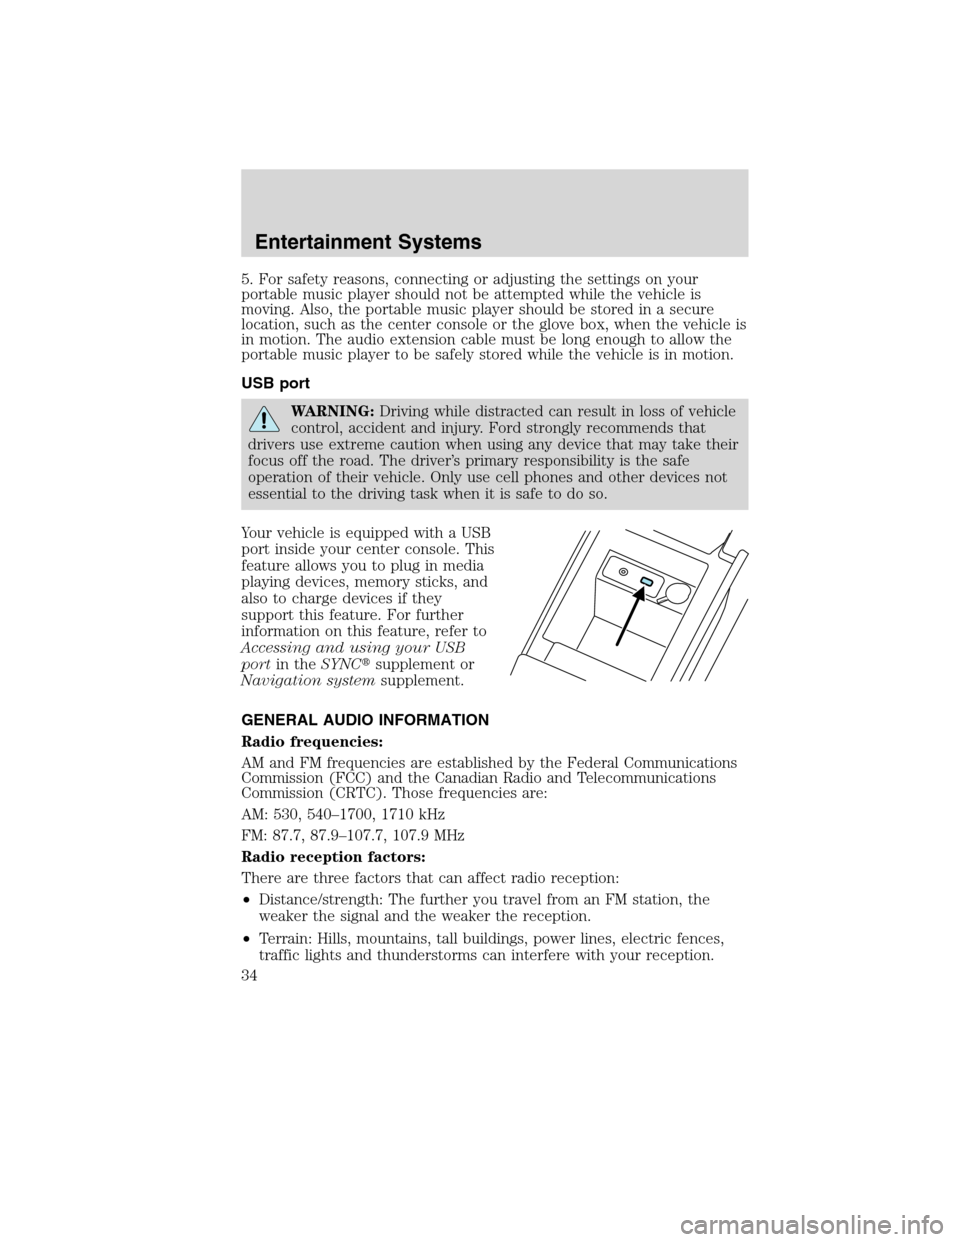 LINCOLN MKX 2010  Owners Manual 5. For safety reasons, connecting or adjusting the settings on your
portable music player should not be attempted while the vehicle is
moving. Also, the portable music player should be stored in a sec